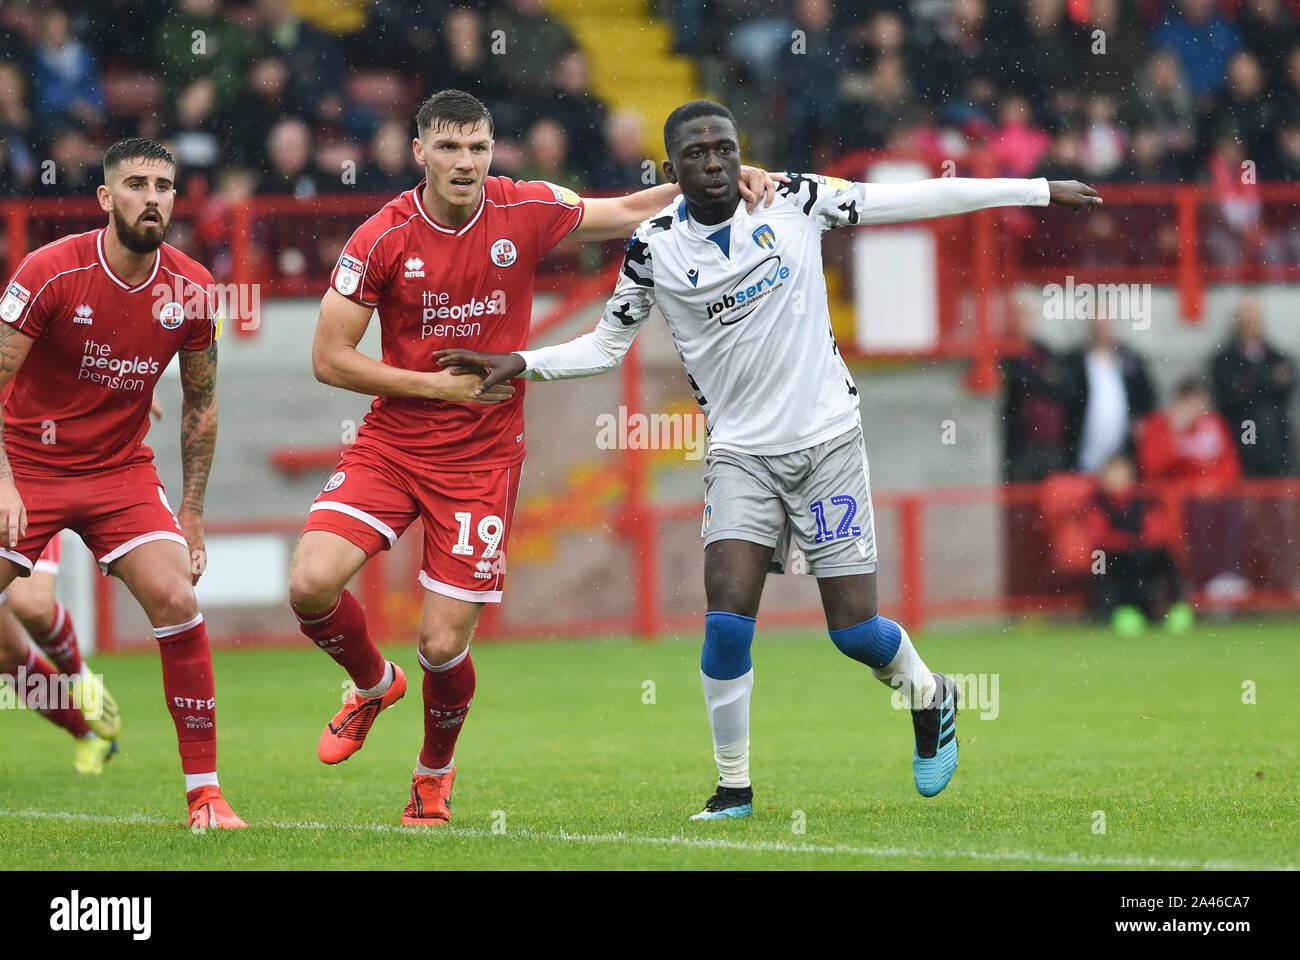 Crawley UK 12 October 2019 - Jordan Tunnicliffe of Crawley (left) with Brendan Sarpong-Wiredu of Colchester during the Skybet League Two match between Crawley Town and Colchester United at the People's Pension Stadium . Credit : Simon Dack TPI / Alamy Live News Stock Photo